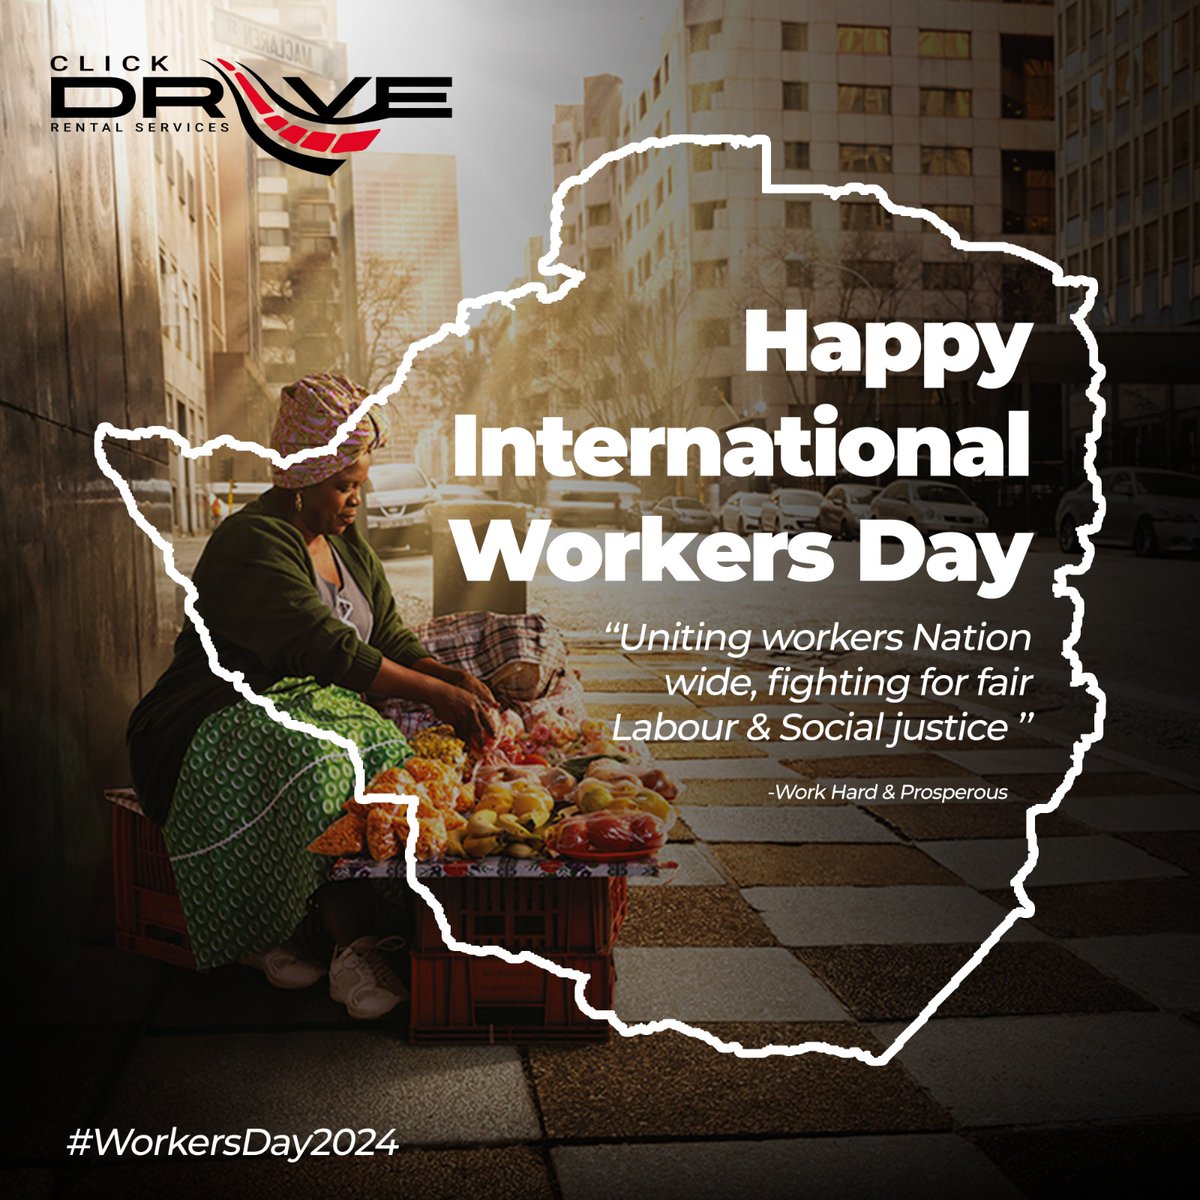 Wishing all workers a well-deserved break on this special day .

No work is insignificant ! 

#happyworkersday 
#clickdriverental 
#holidays